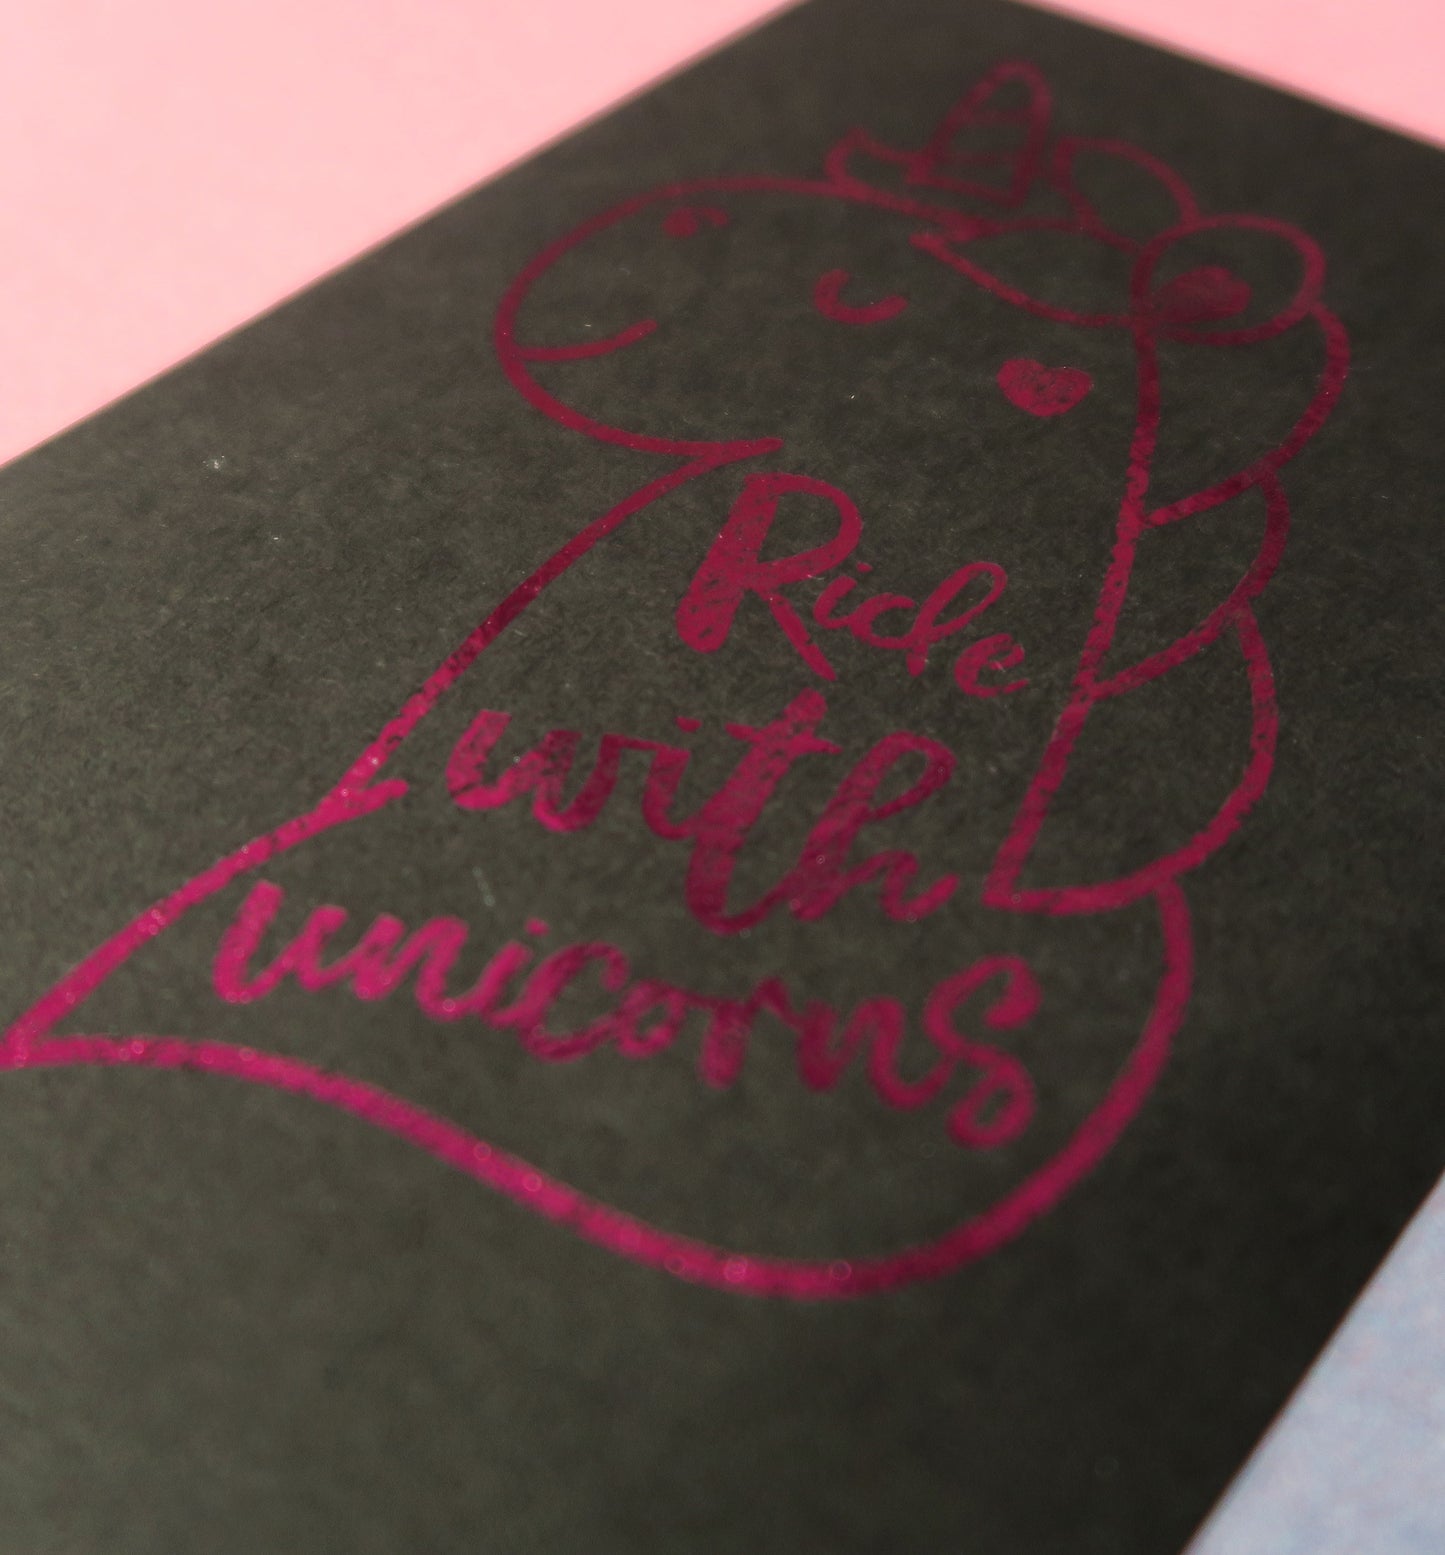 I do it better with stix | Foiled print / greeting card